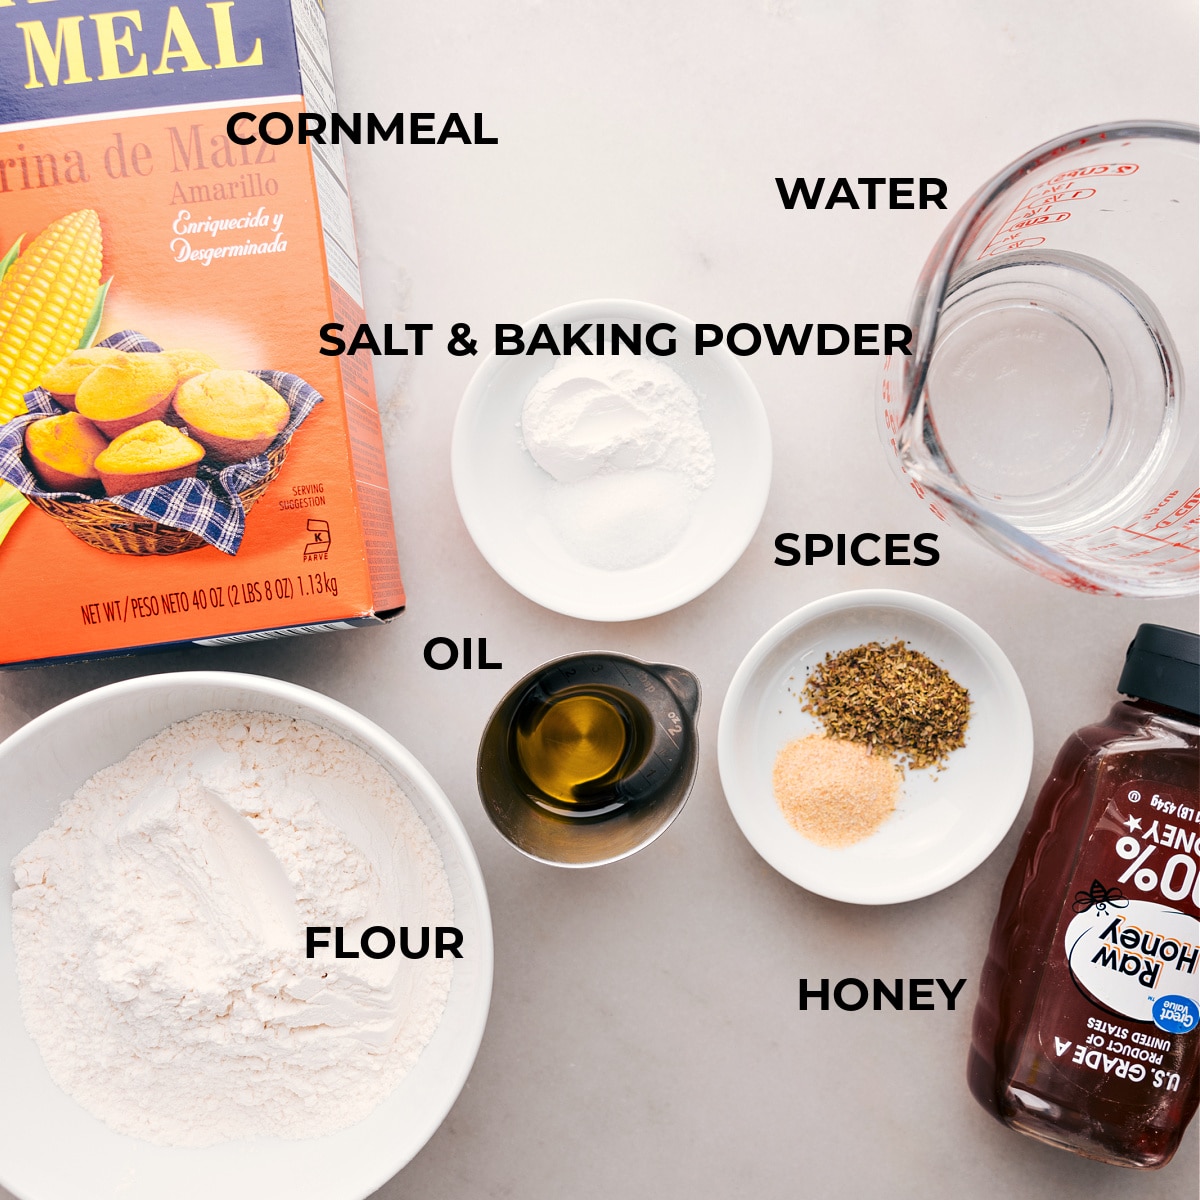 Ingredients laid out for making No-Yeast Pizza Dough.